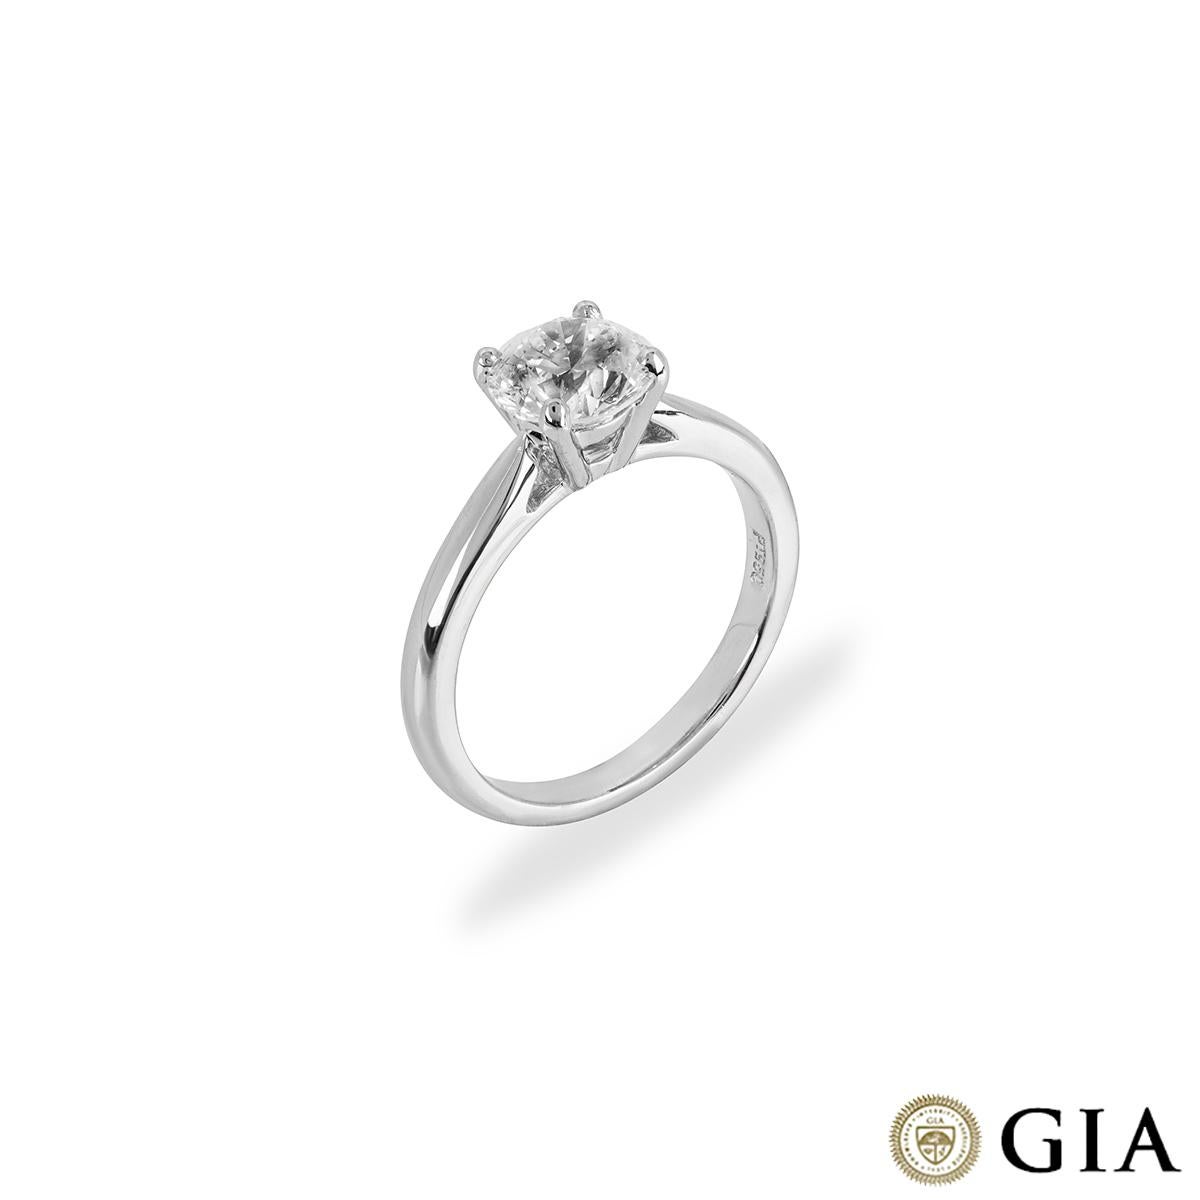 A stunning diamond solitaire ring set in platinum. The engagement ring is set to the centre with a round brilliant cut diamond weighing 1.77ct, E colour and VS1 clarity. The 2.5mm ring has a gross weight of 5.75 grams and is currently a UK size M /